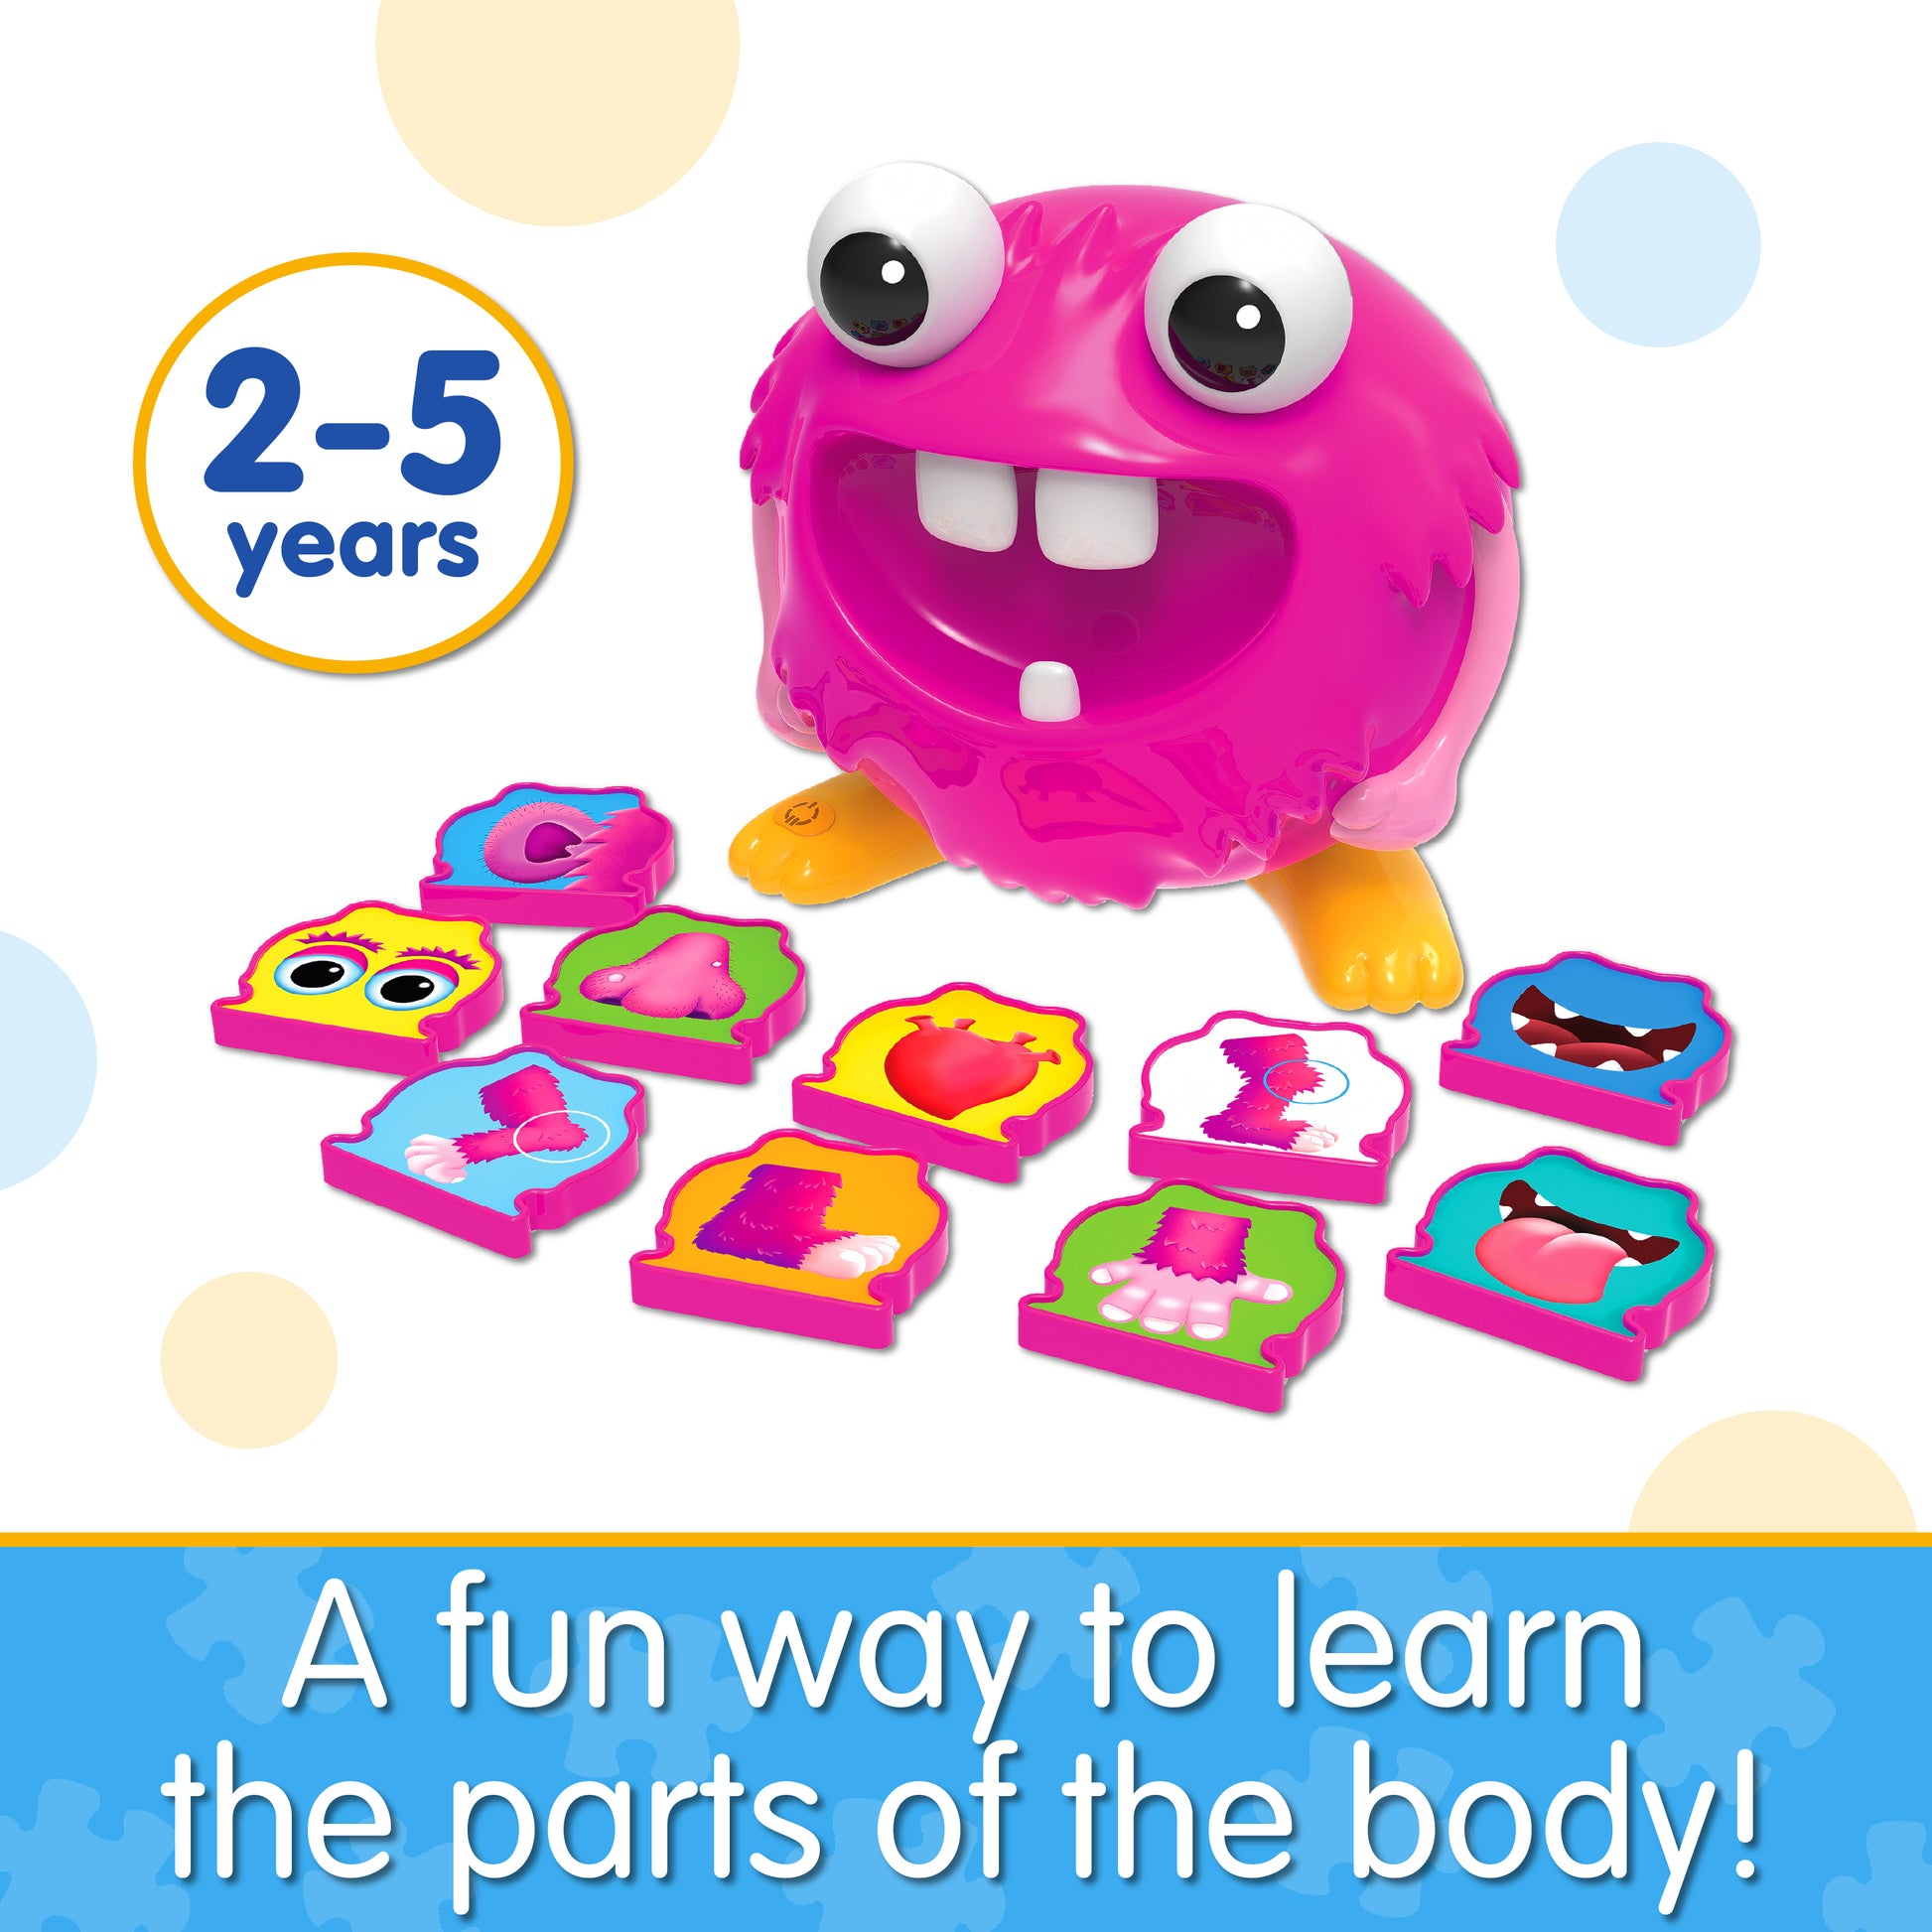 Infographic about Monster Me that says, "A fun way to learn about parts of the body!"